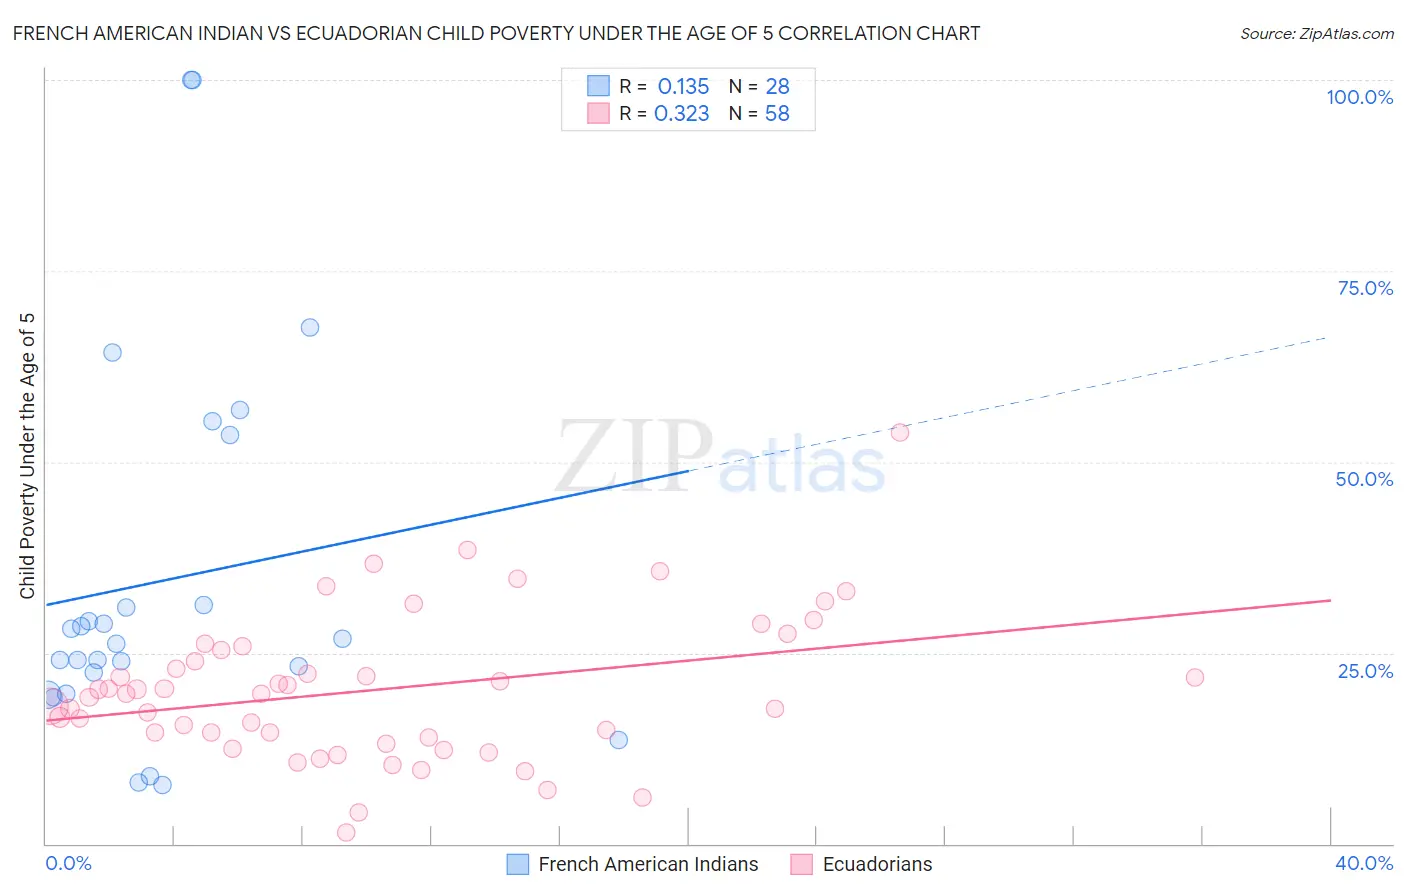 French American Indian vs Ecuadorian Child Poverty Under the Age of 5